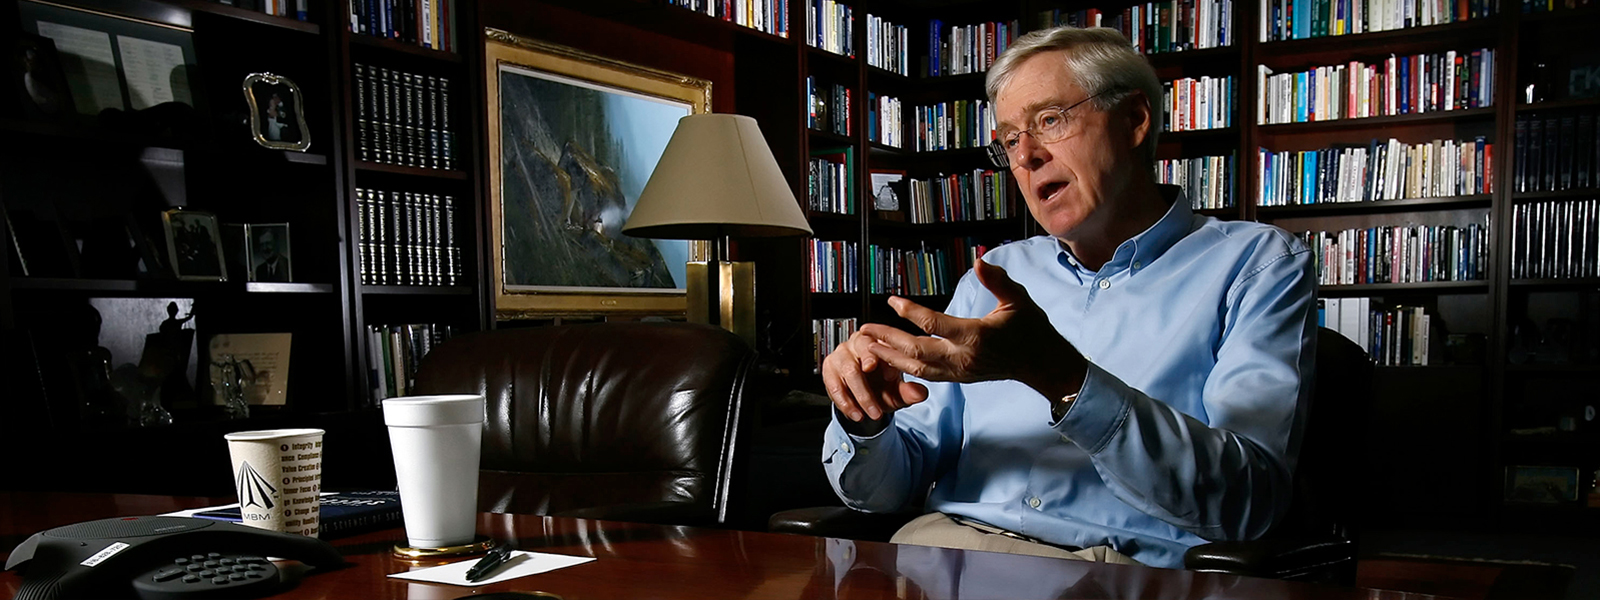 Chamber’s 2015 Annual Meeting to feature Charles Koch interview 